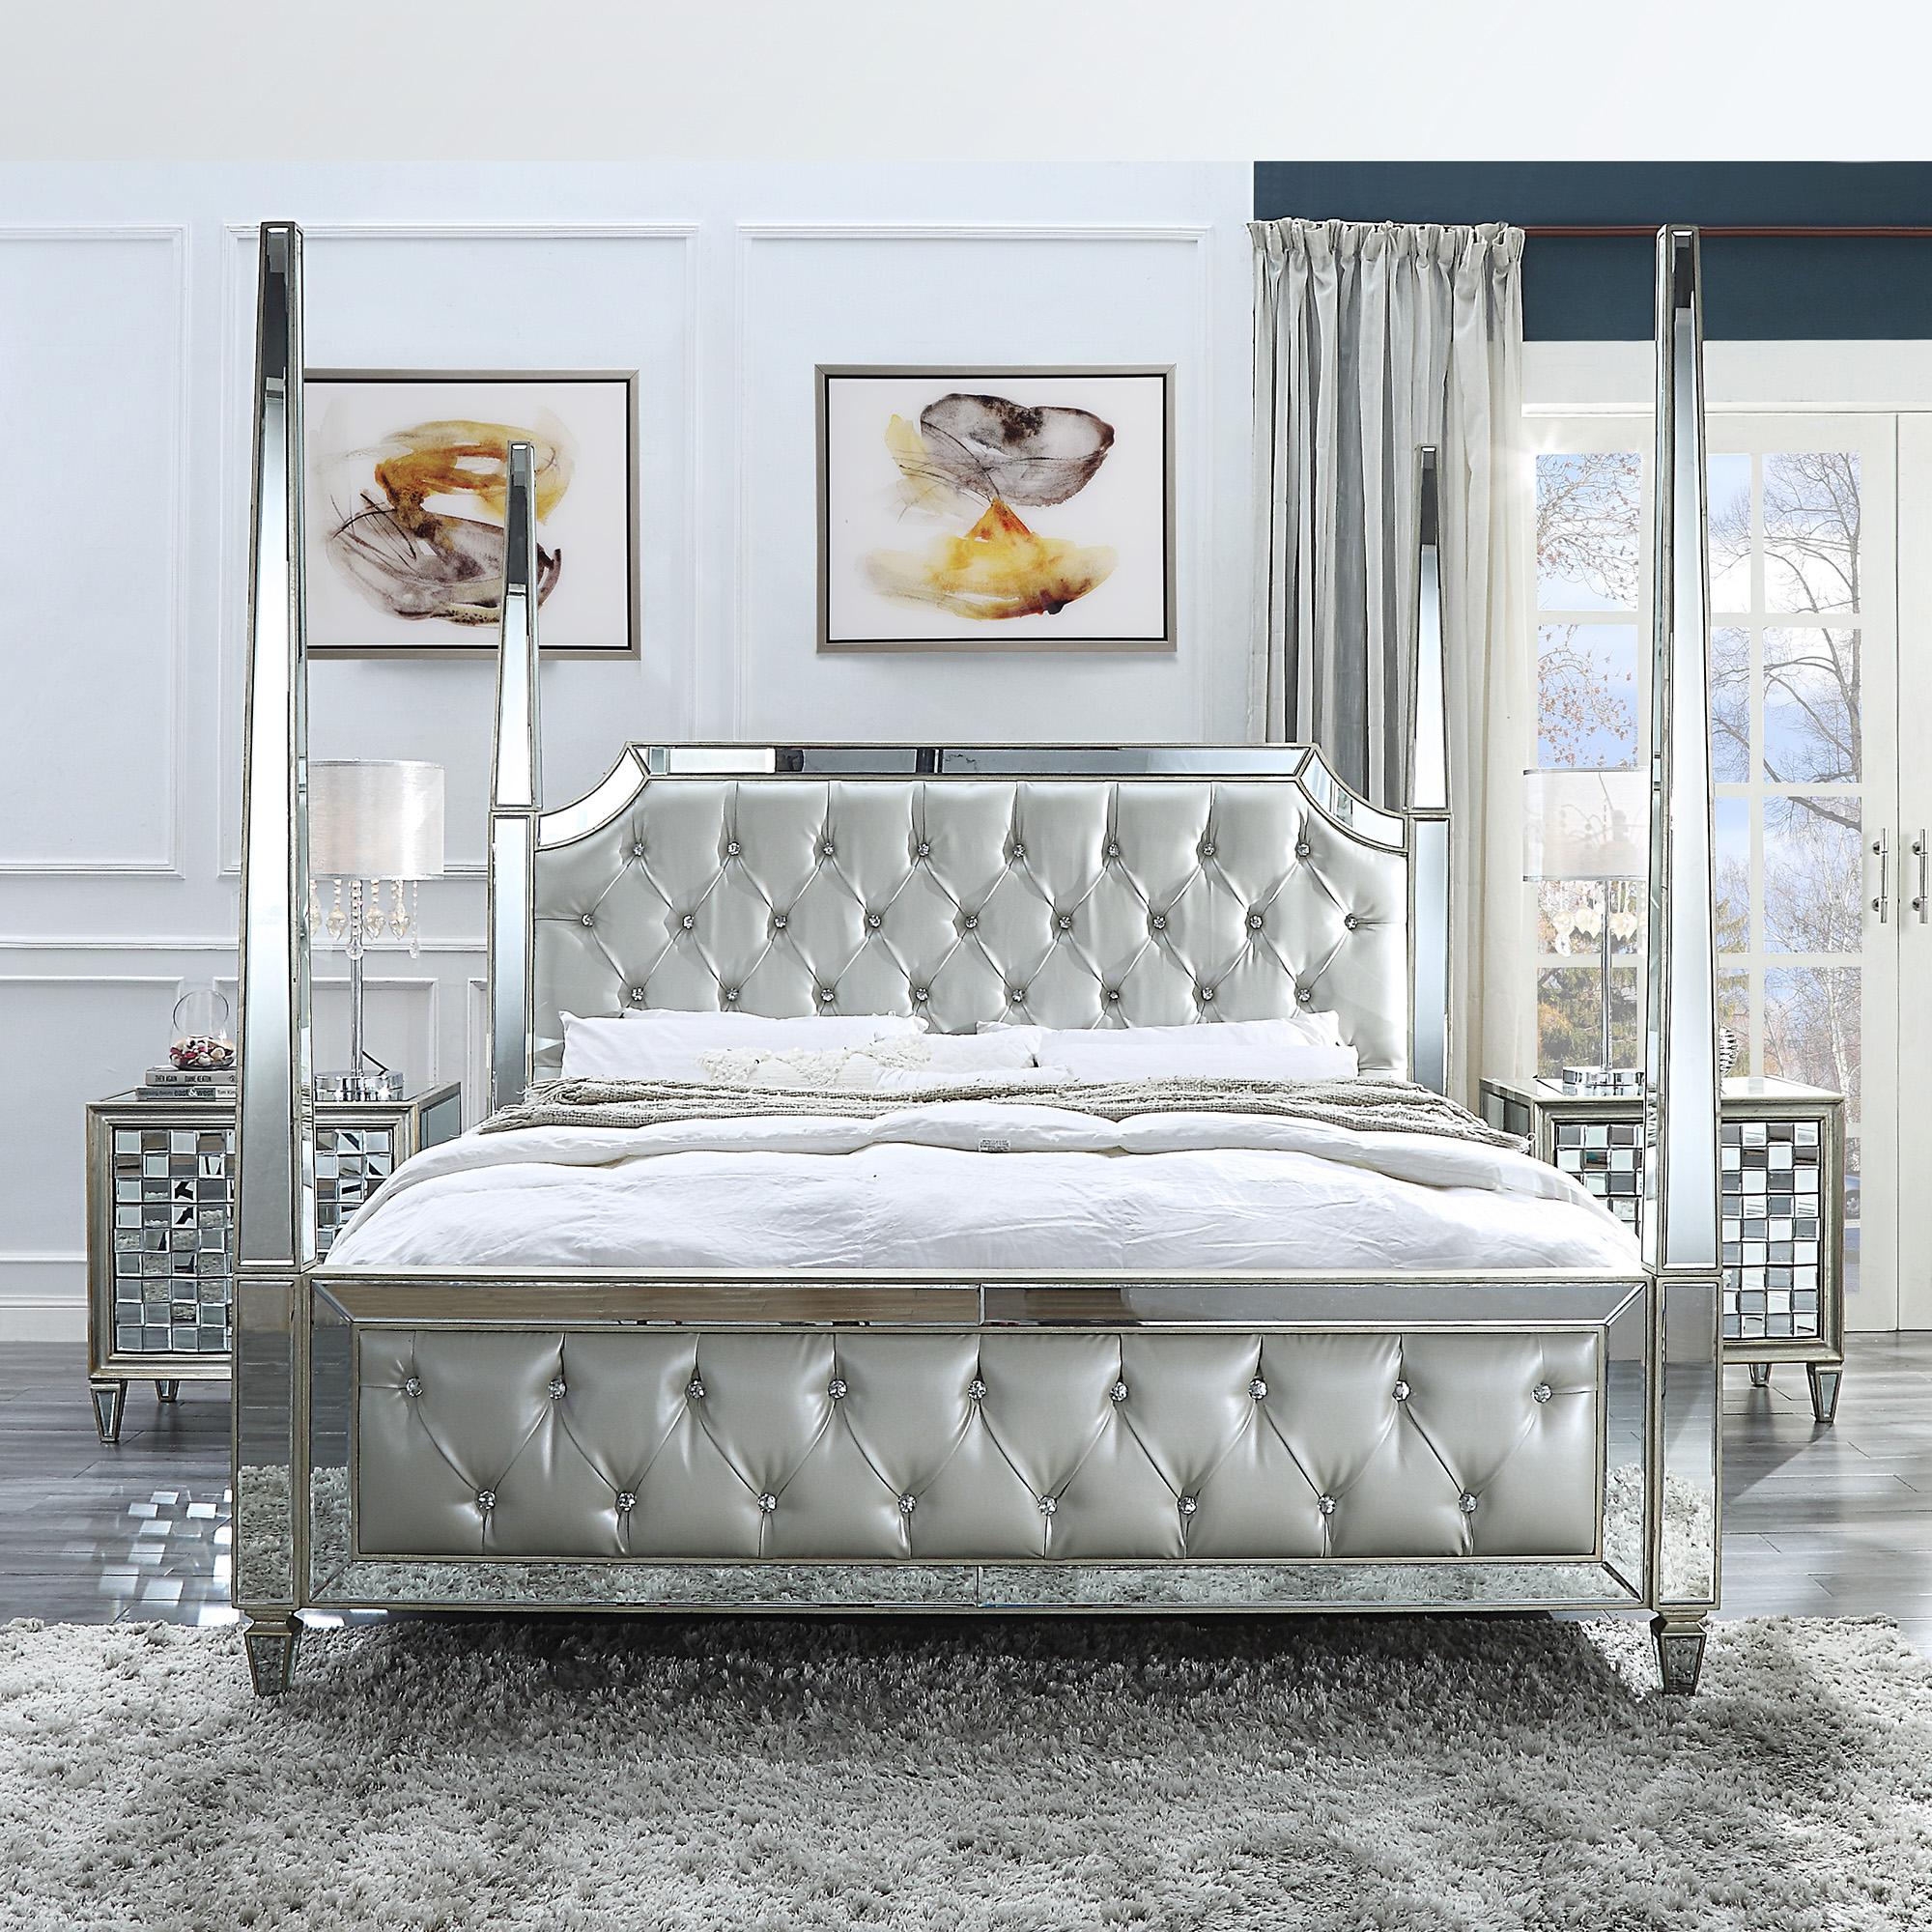 

    
Homey Design Furniture HD-6001 Canopy Bedroom Set Mirrored/Silver HD-CK6001-5PC-BEDROOM
